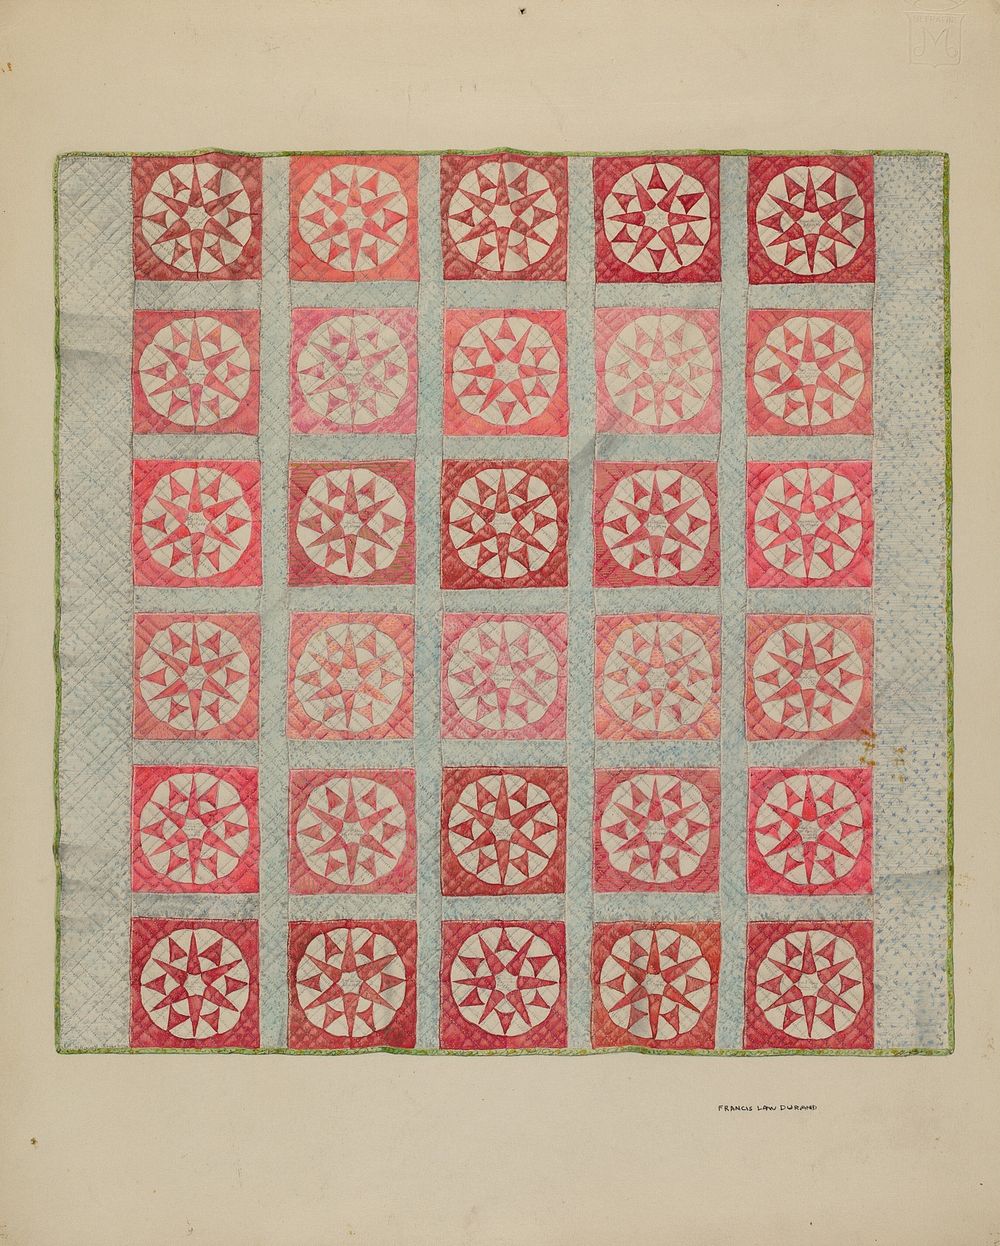 Quilt (c. 1937) by Francis Law Durand.  